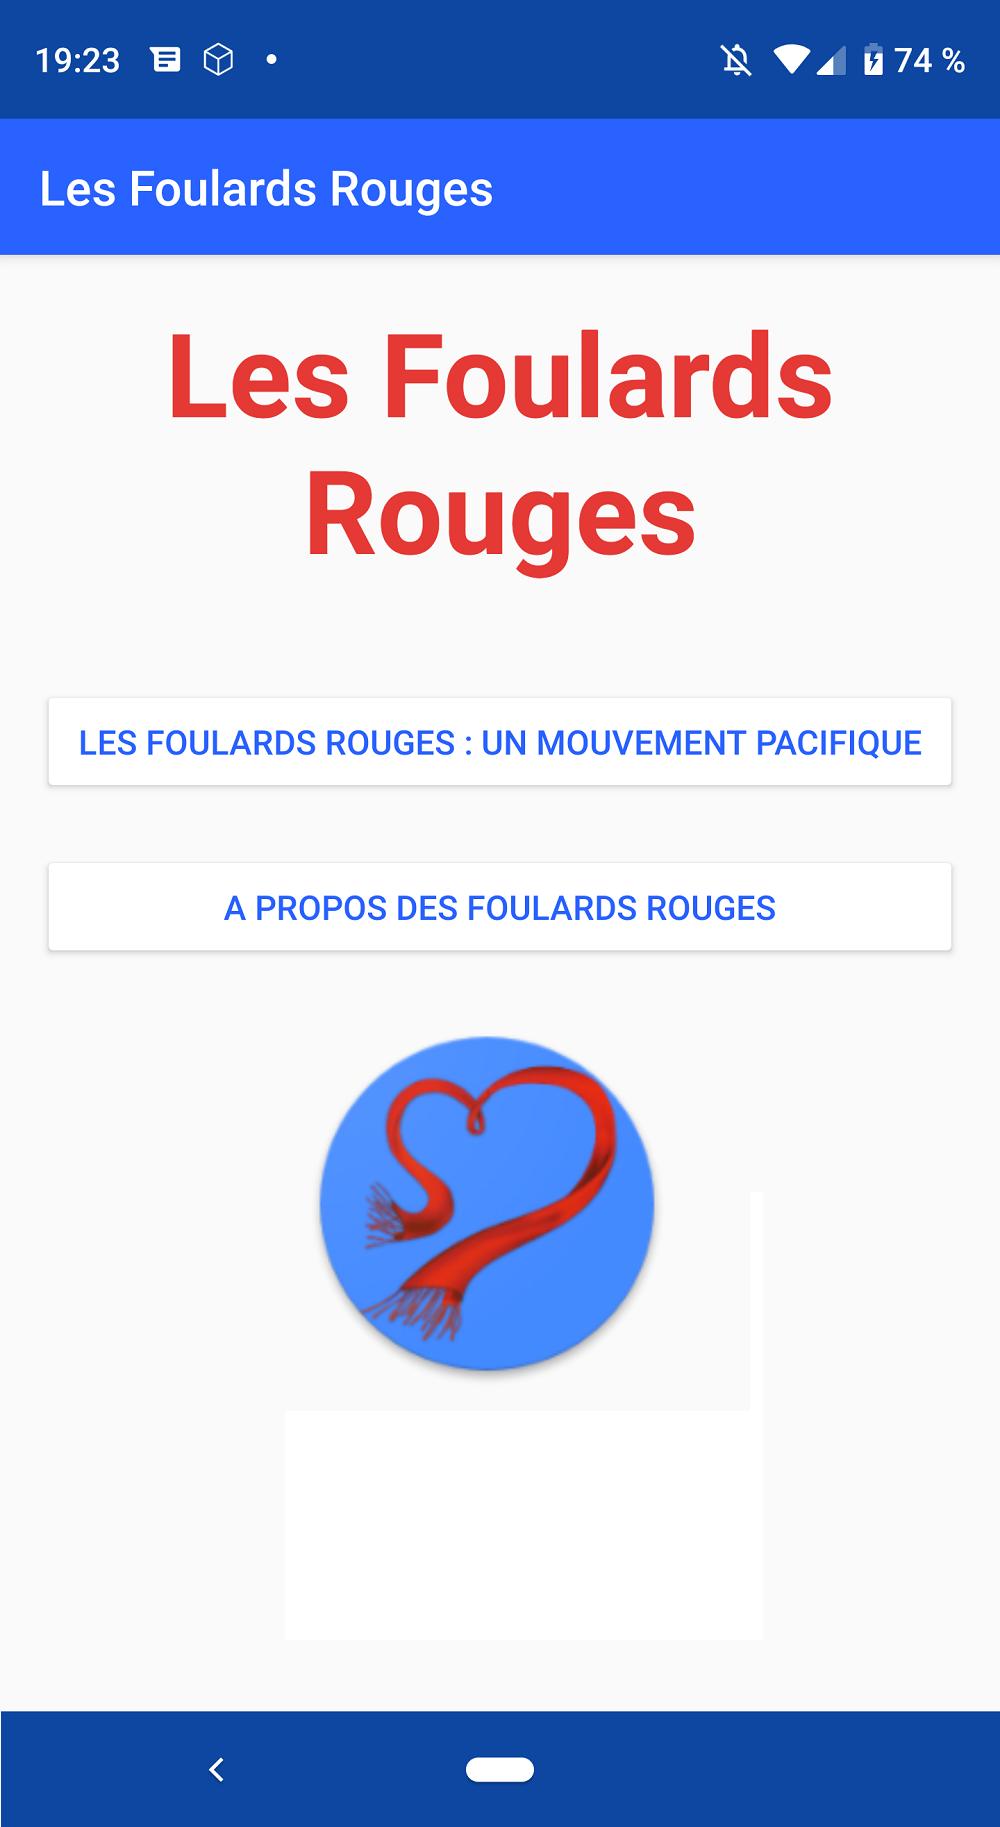 Les Foulards Rouges for Android - APK Download